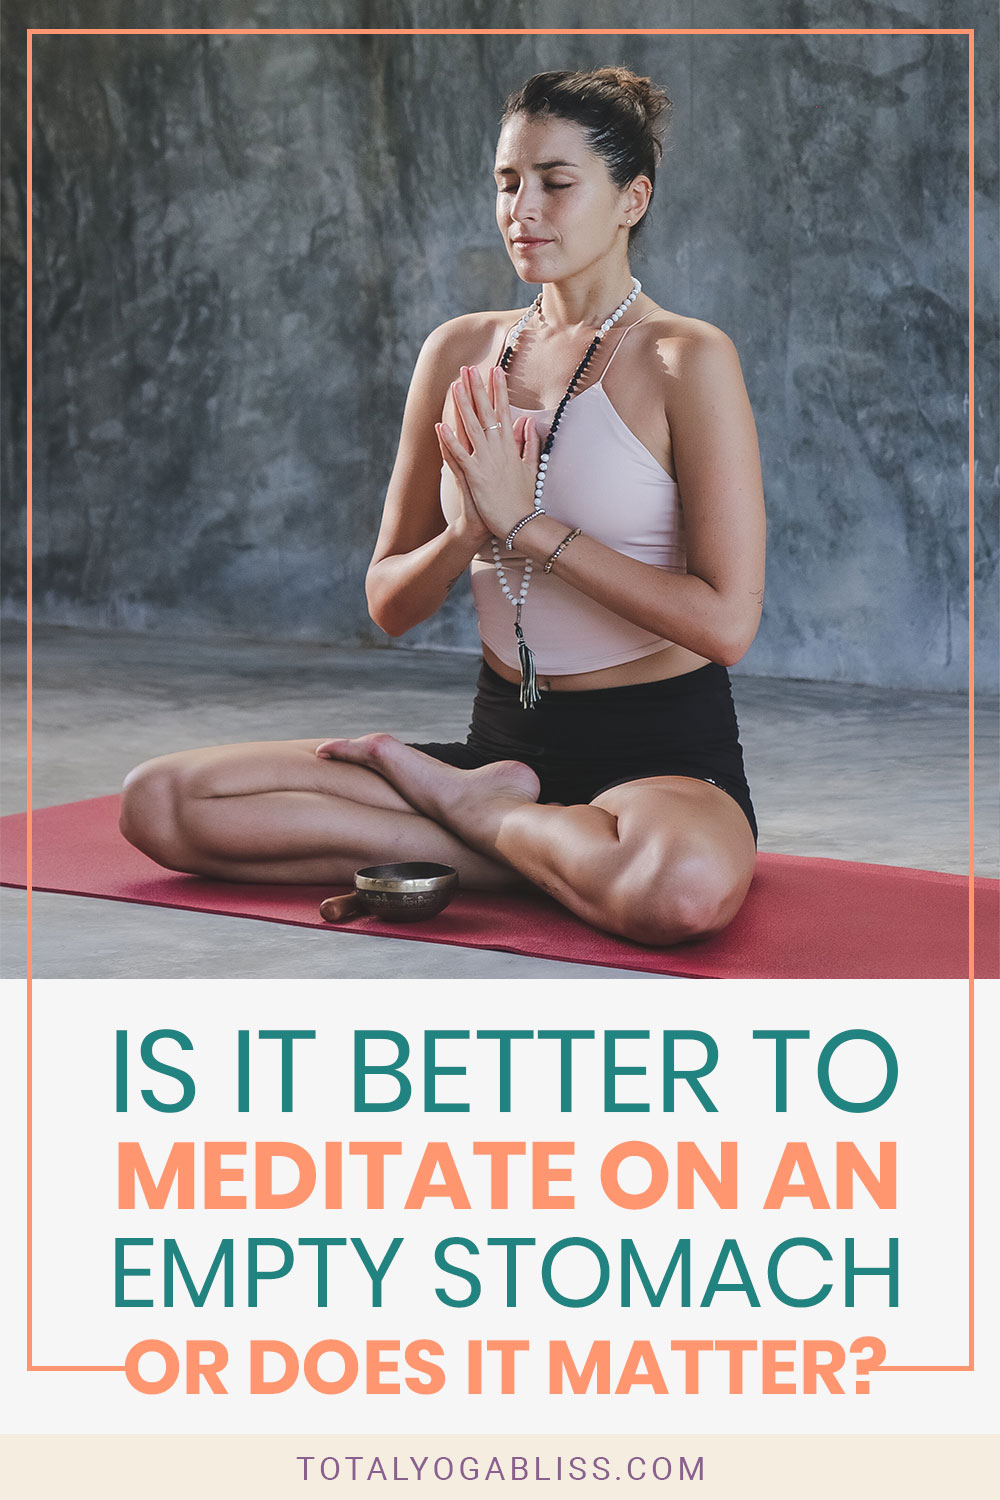 Is it Better to Meditate on an Empty Stomach or Does it Matter?